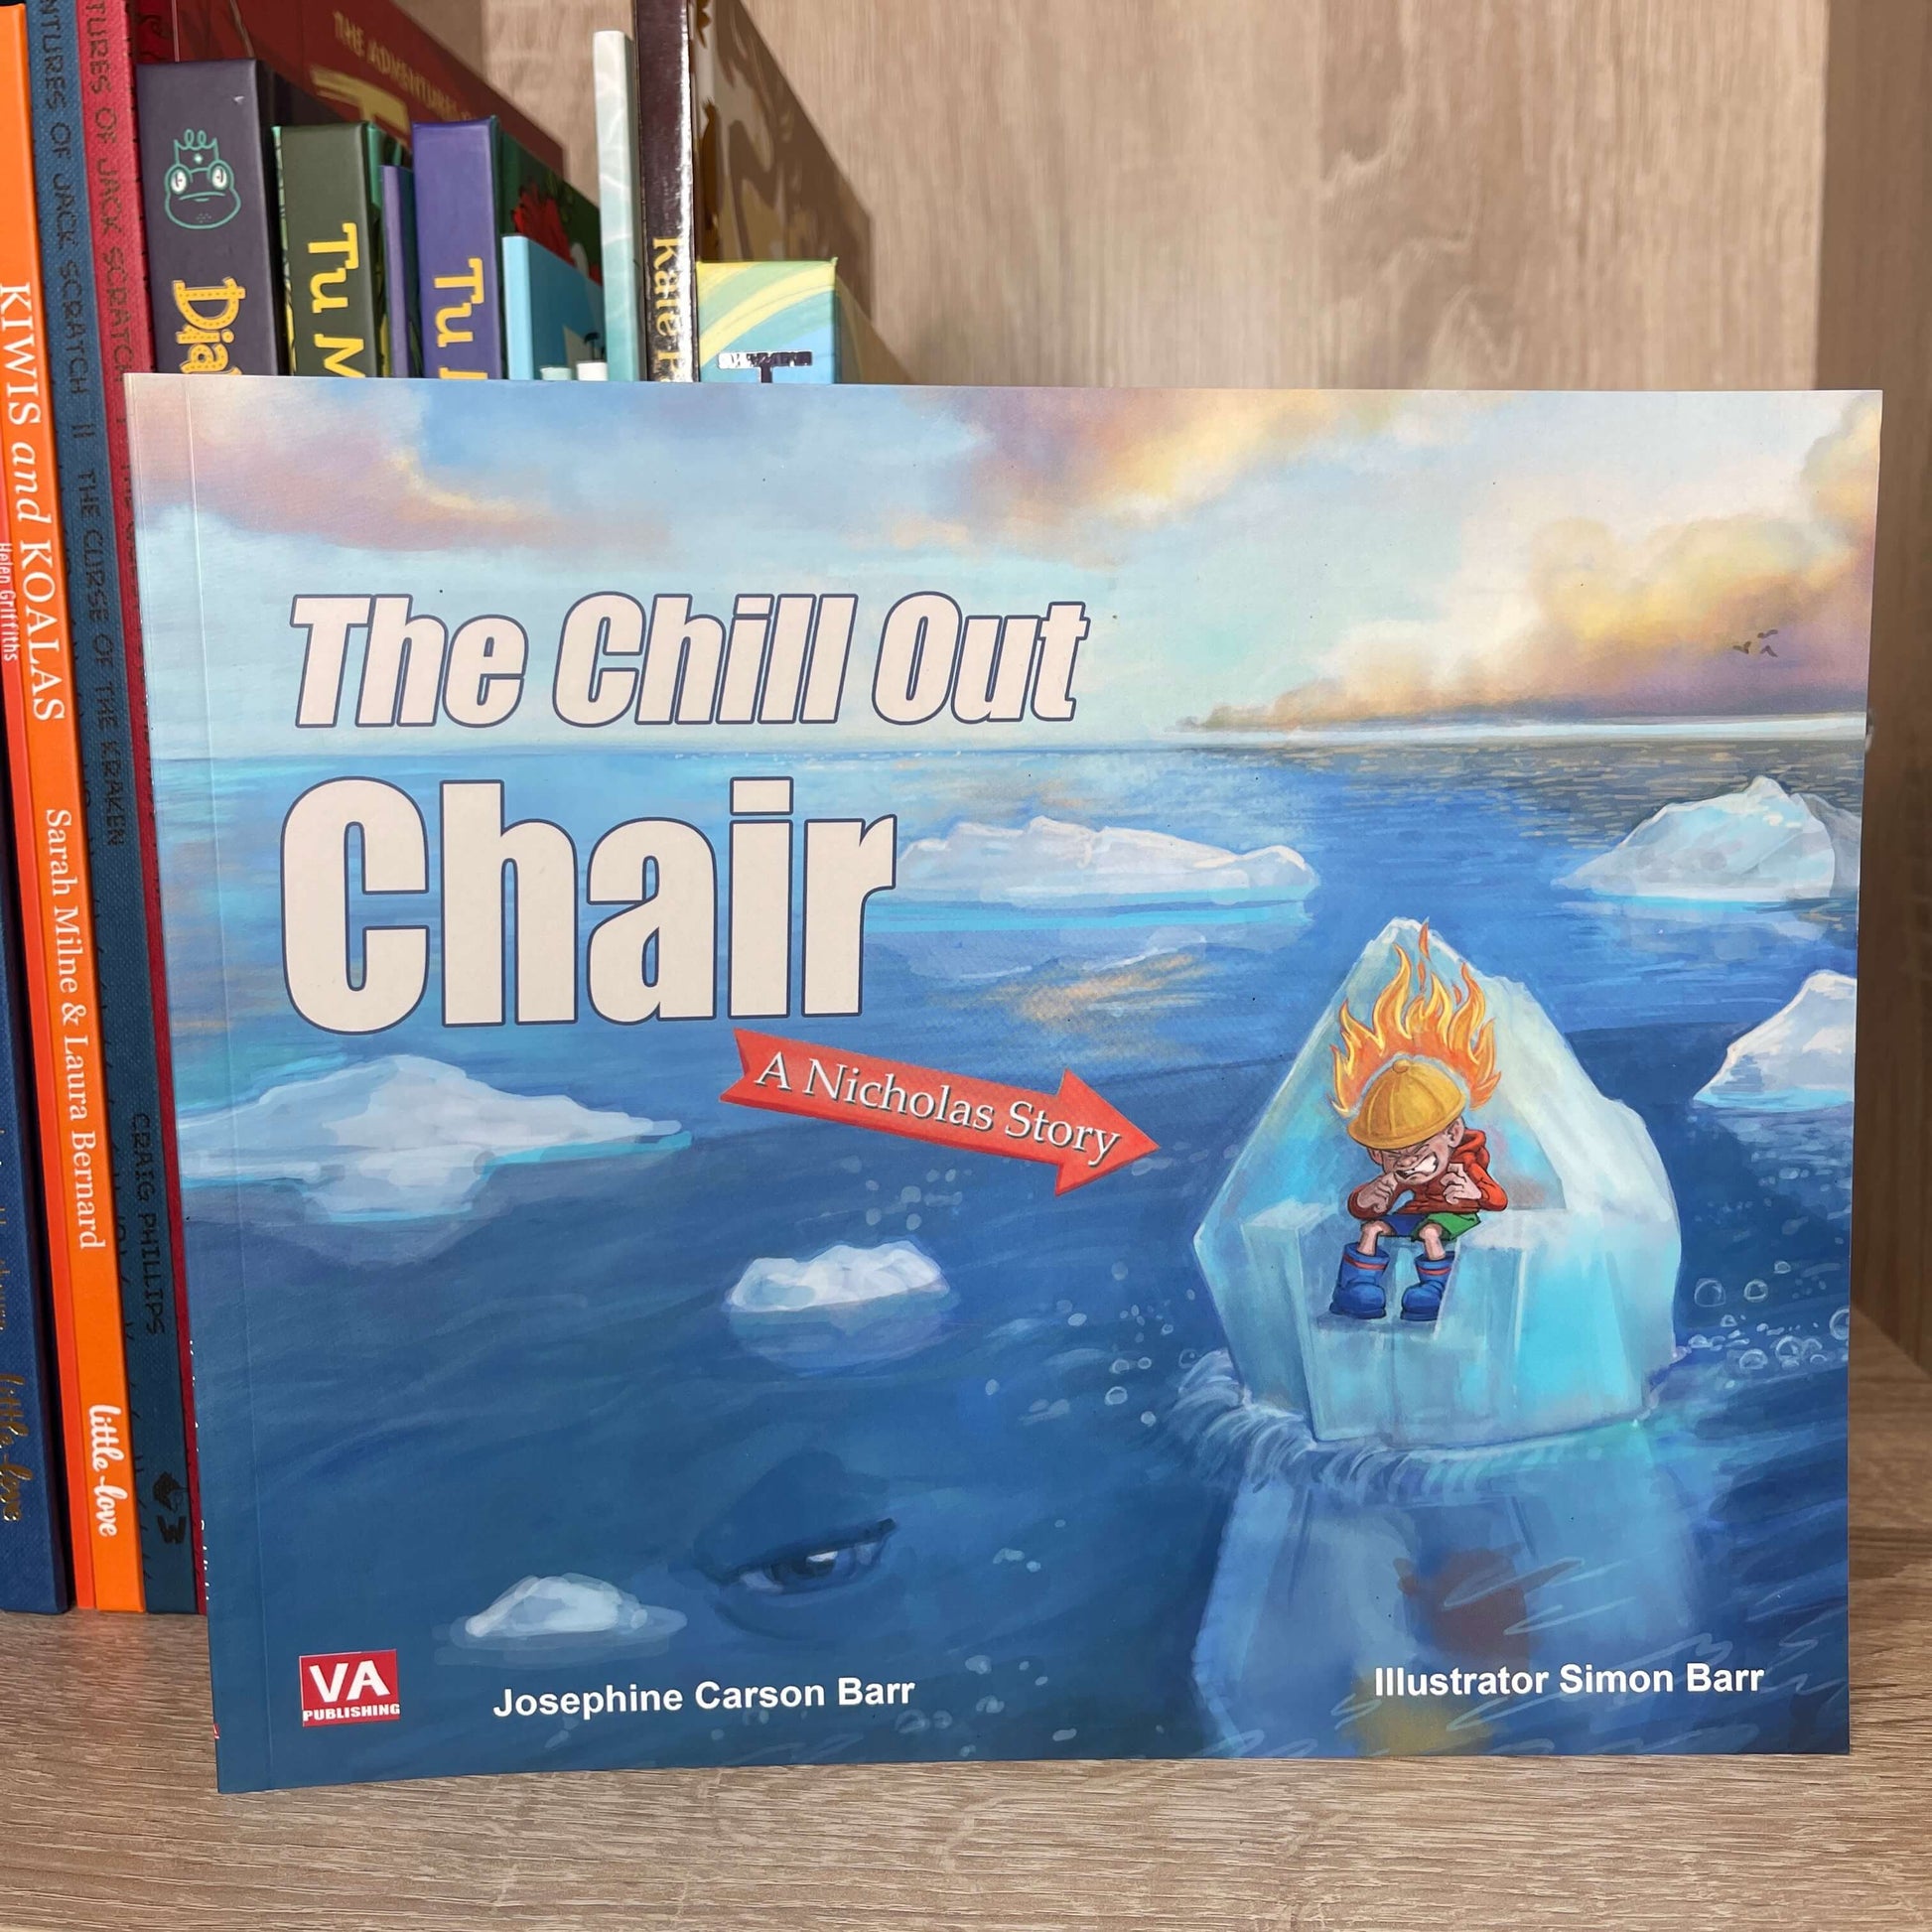 Childrens book The Chill Out Chair by Josephine Carson Barr.